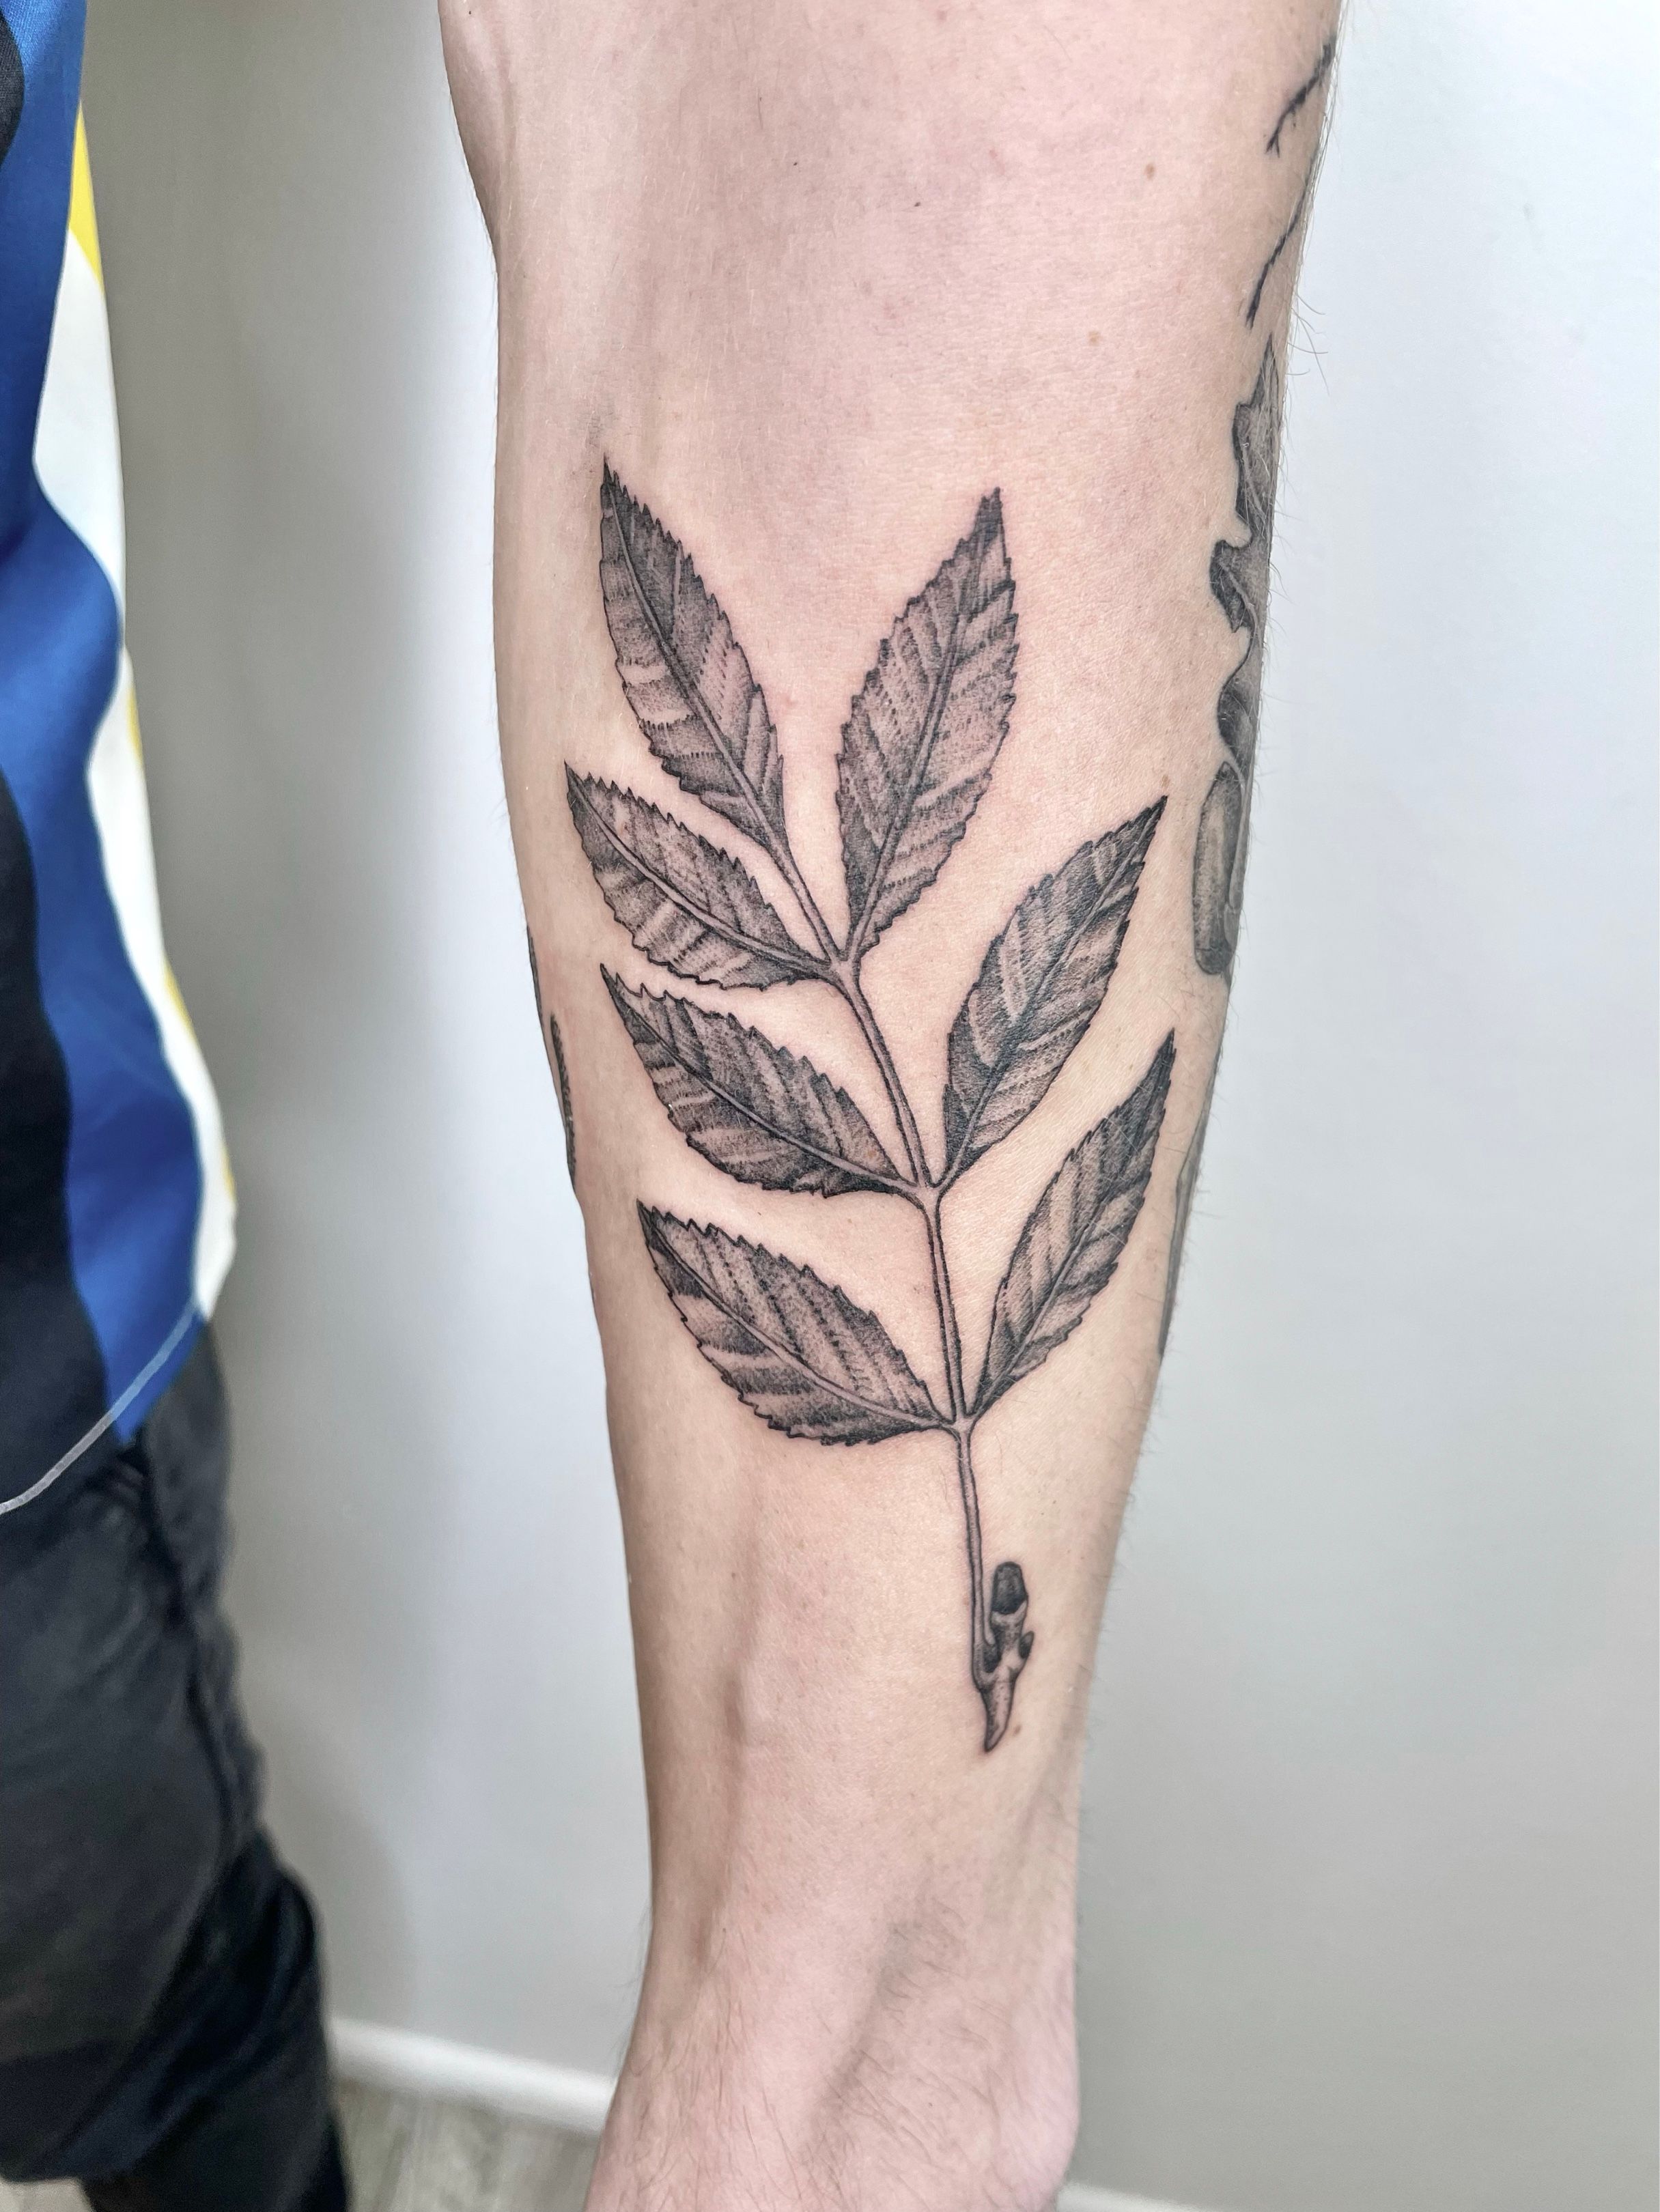 The Spiritual Journey Of Getting A Tree Tattoo